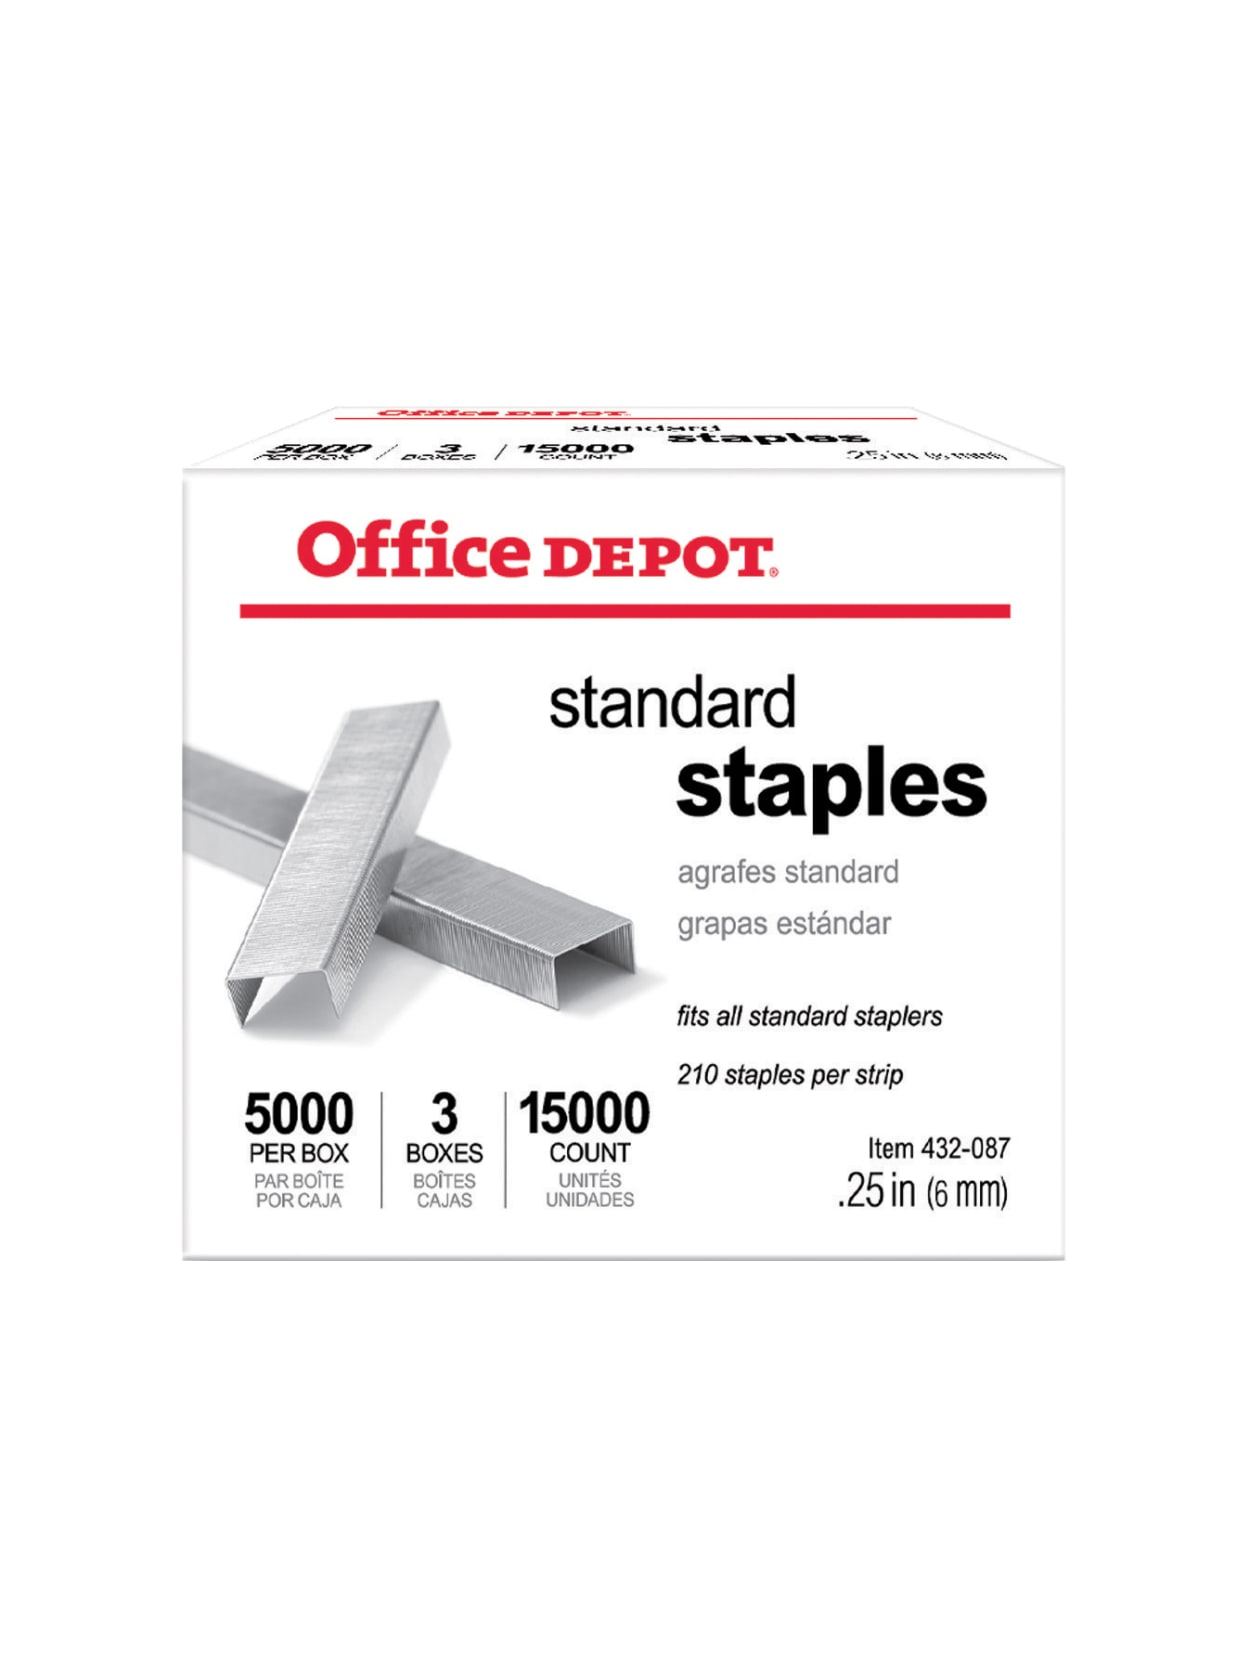 NUMBER 10 STAPLES  STAPLE PINS FOR SCHOOL OFFICE 15,000 BRAND NEW 5 STAR No 10 